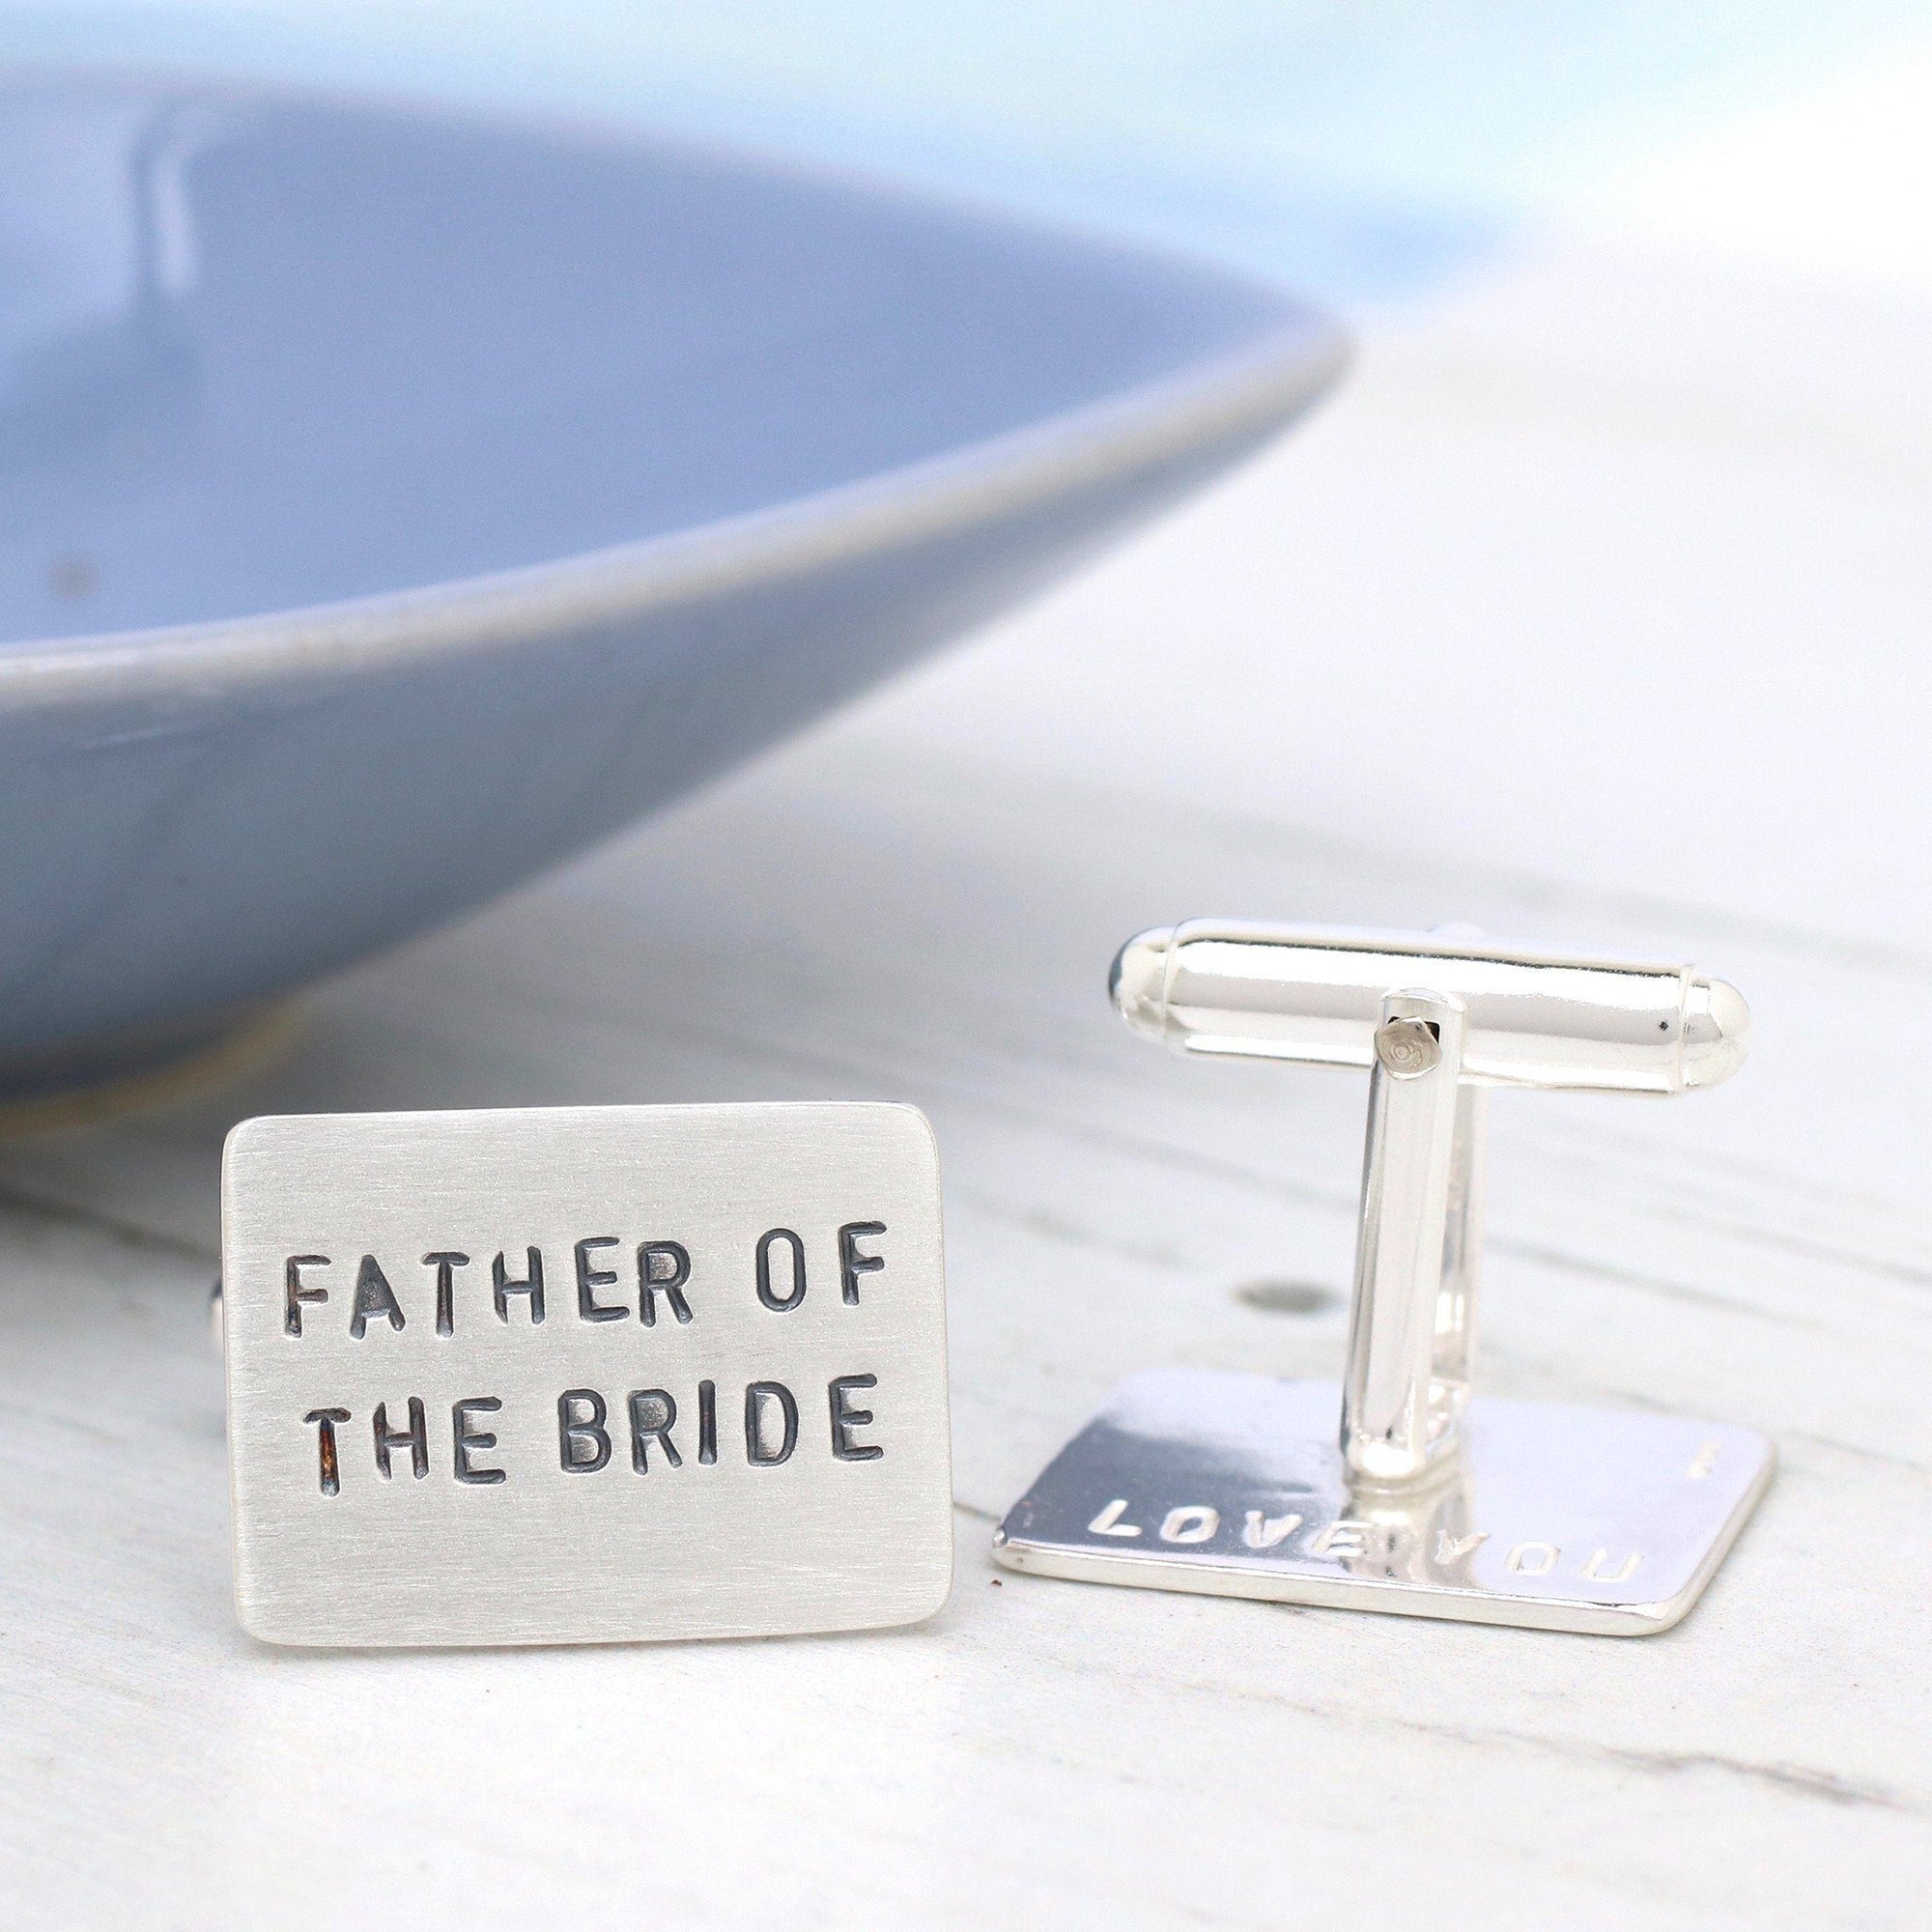 father of the groom cufflinks